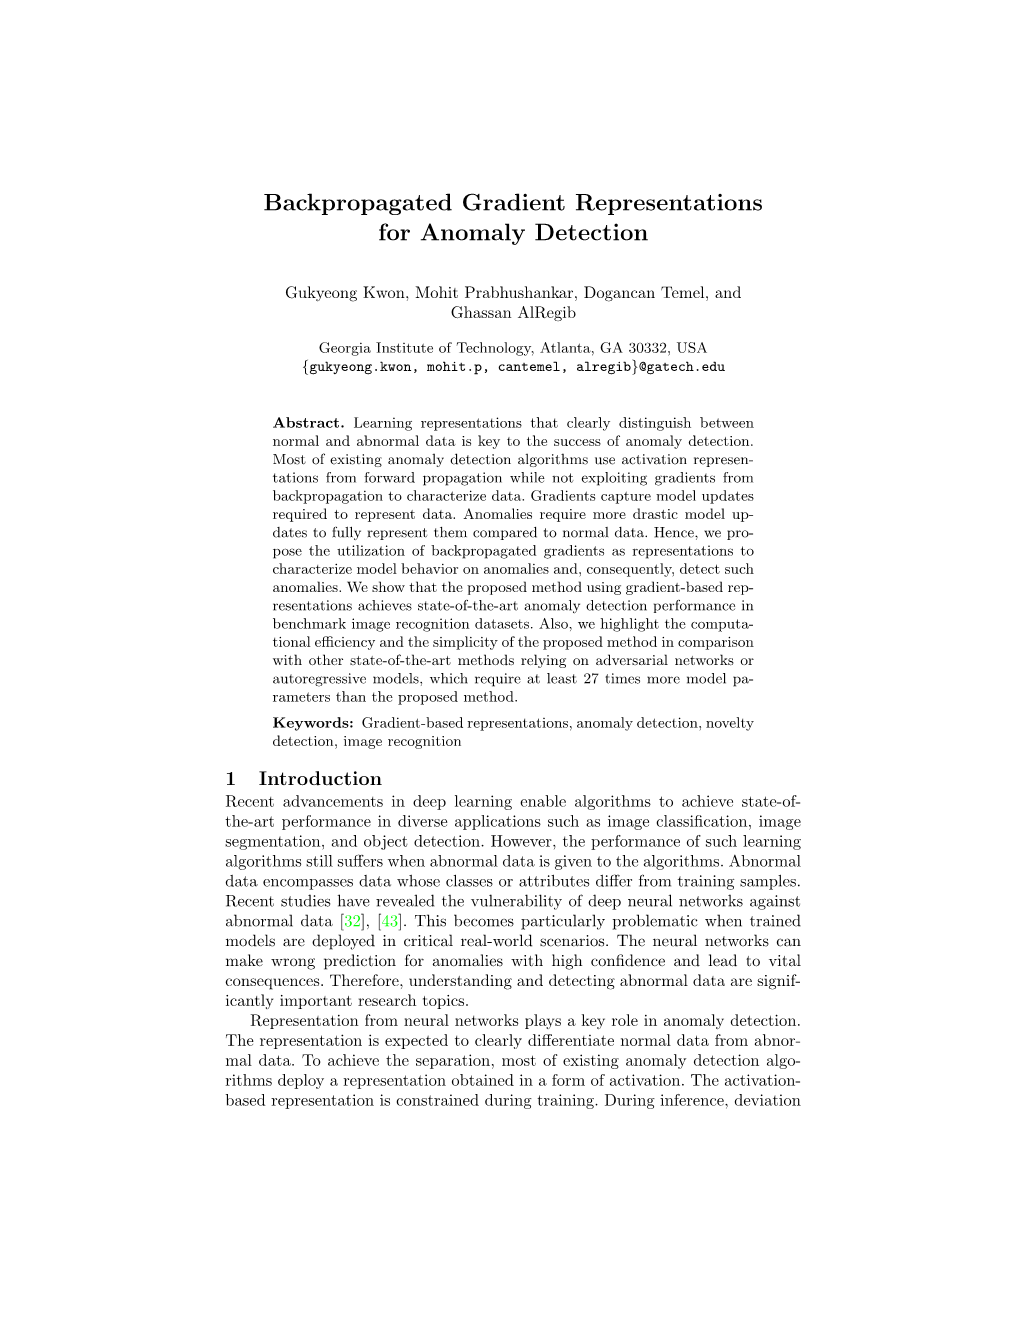 Backpropagated Gradient Representations for Anomaly Detection